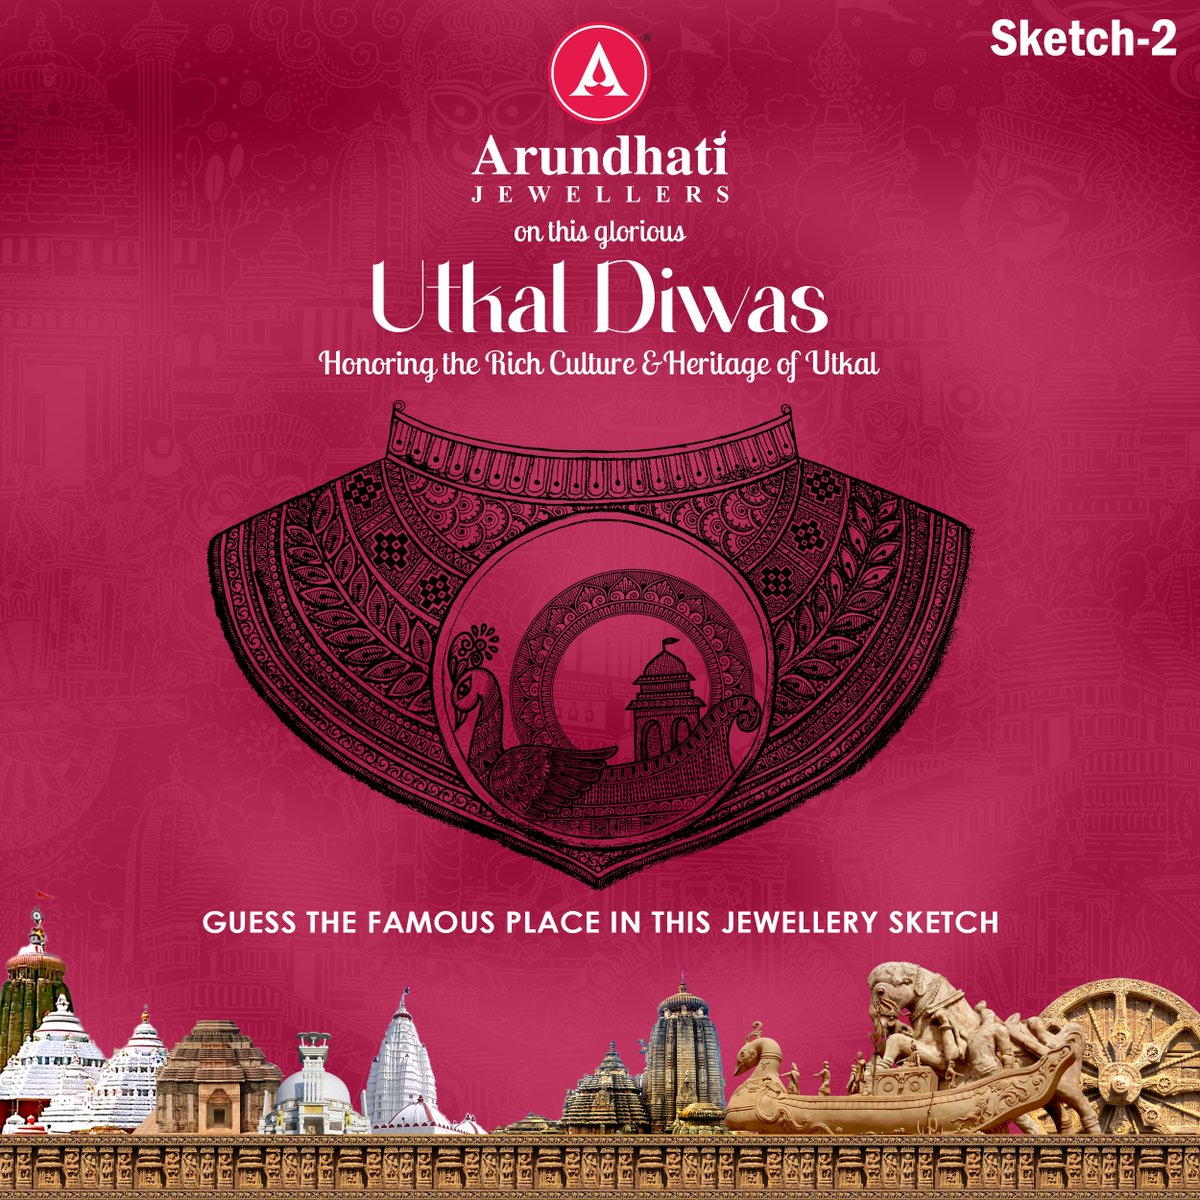 𝐁𝐢𝐠 #ContestAlert - ( 𝗦𝗸𝗲𝘁𝗰𝗵 𝟐 )
Guess the famous place in this Jewellery Sketch, and express your love & respect toward the golden history of Odisha. Let's Celebrate & Honor the Rich Culture & Heritage of our Motherland, on this glorious Utkal Diwas.